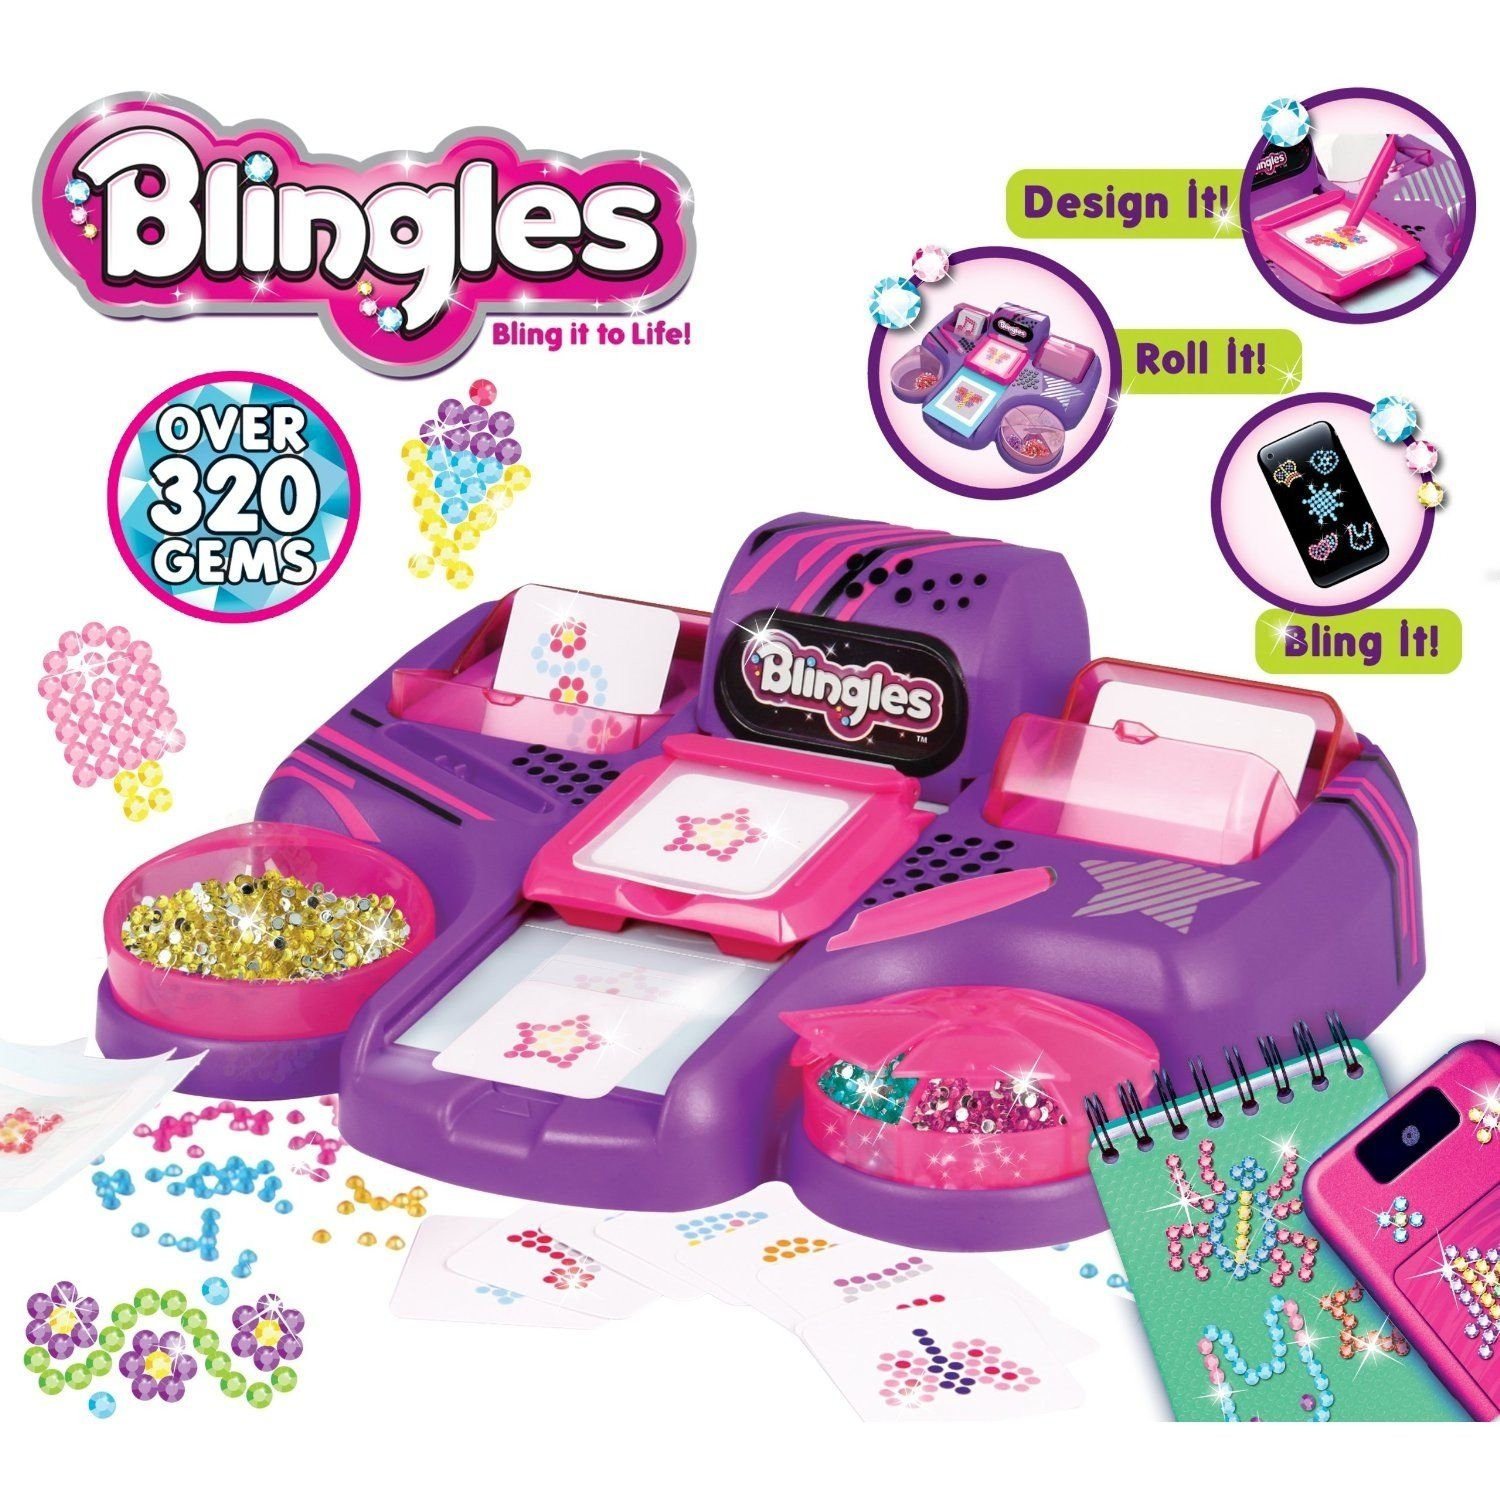 Girls Gift Ideas Age 9
 10 Lovable Gift Ideas For Girls Age 9 2021